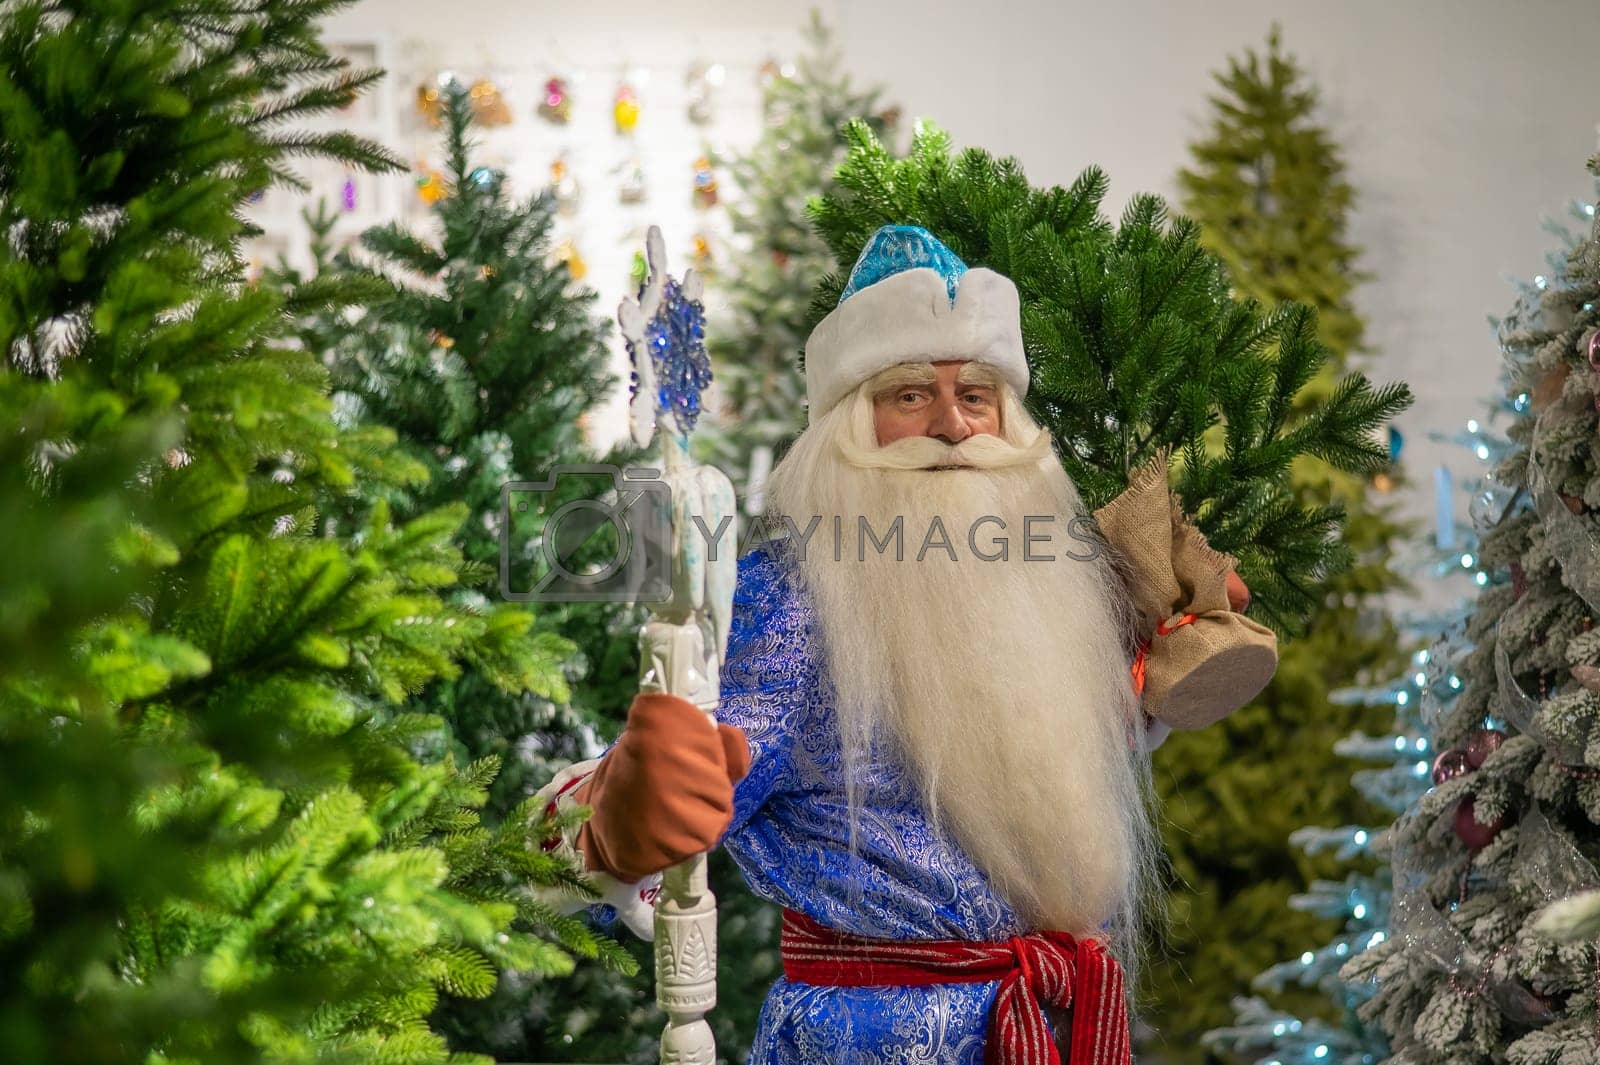 Royalty free image of Russian Santa Claus with a staff in a store of artificial Christmas trees. by mrwed54